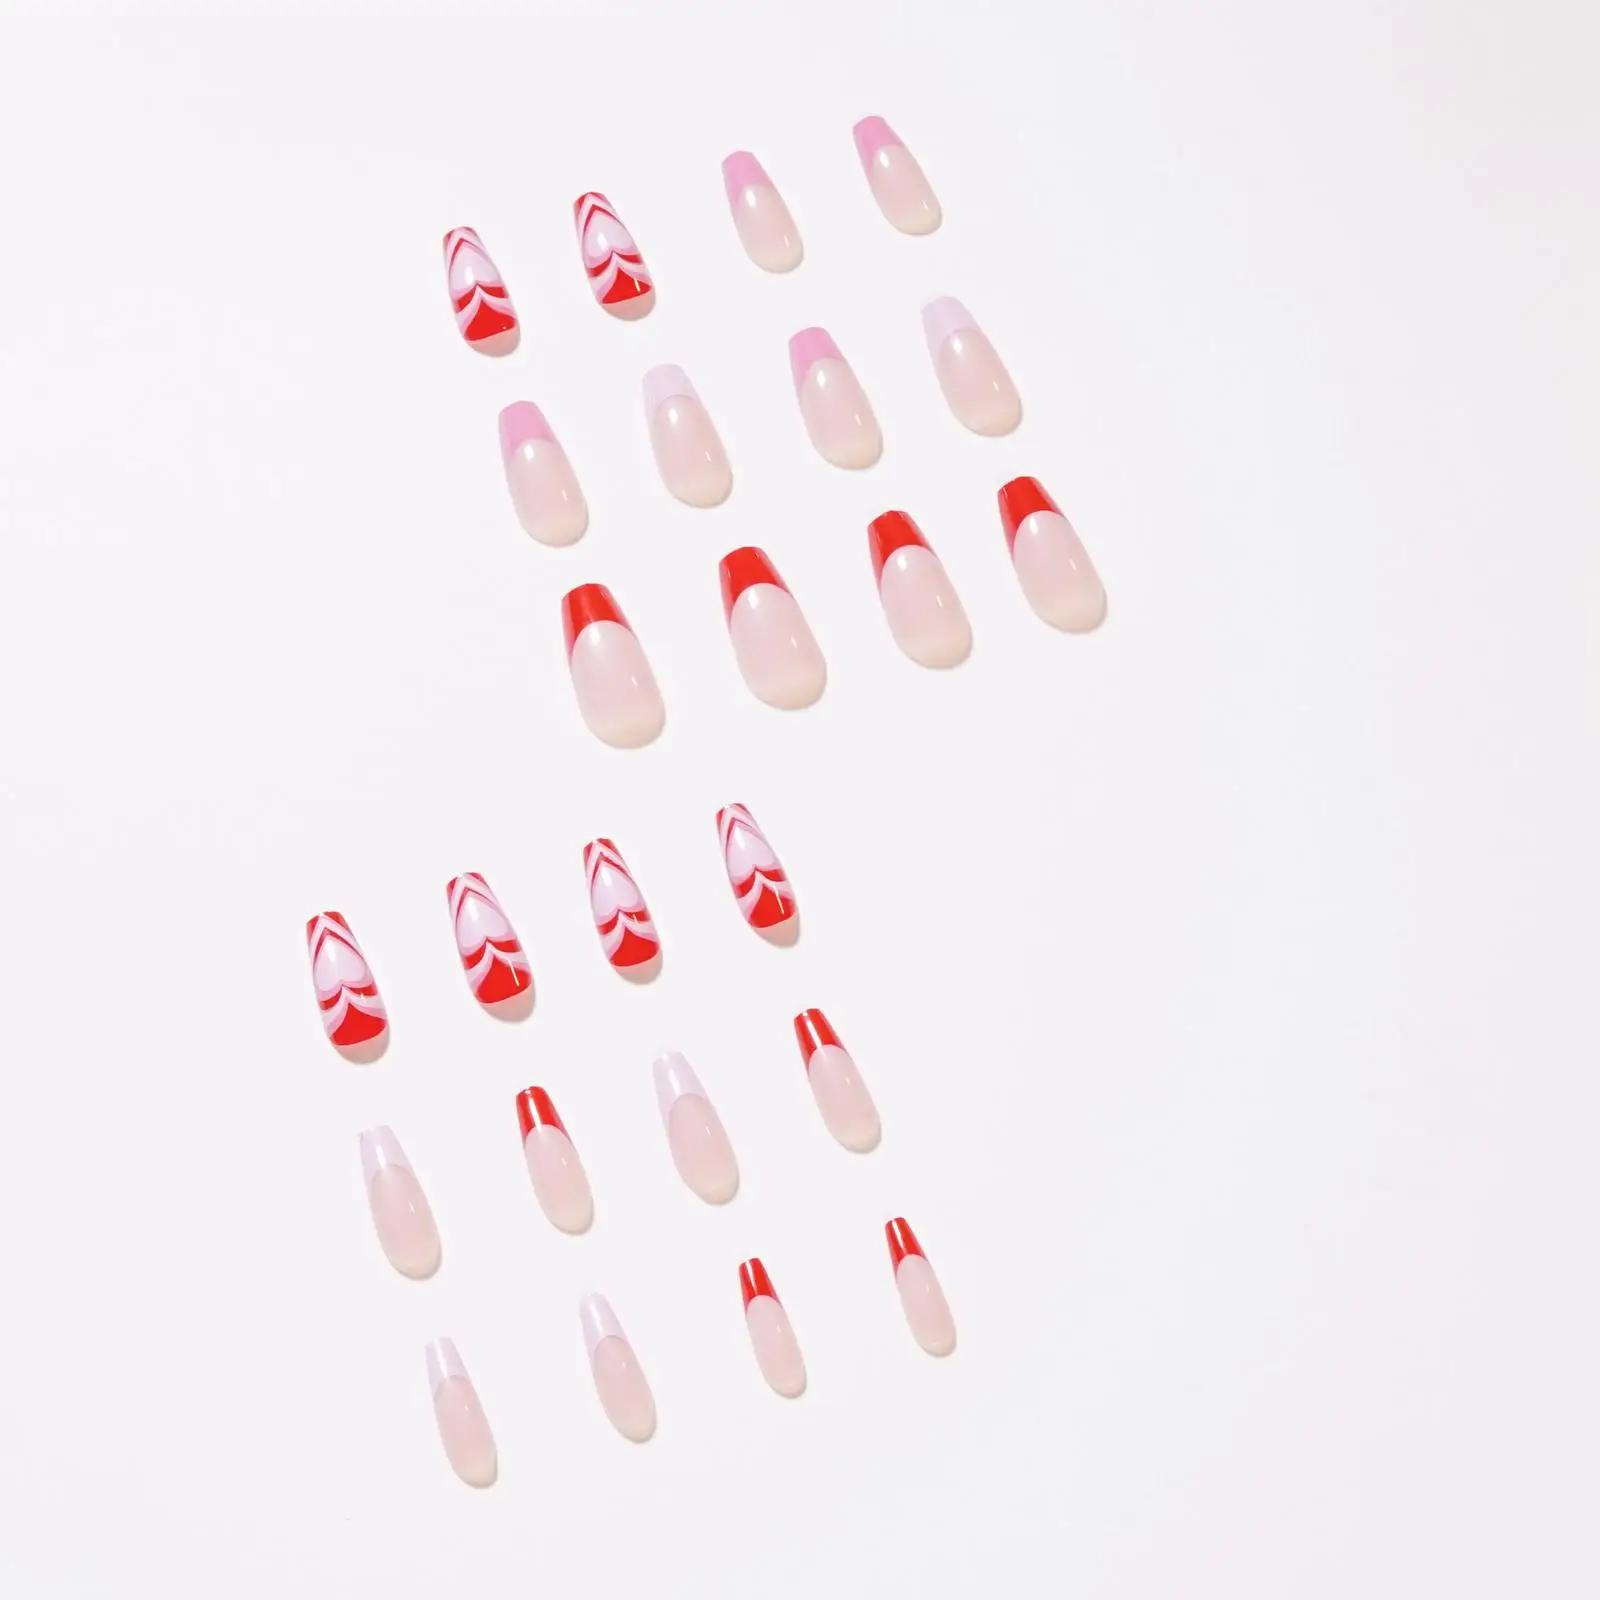 24 Pieces Press on Nails False Nail Women Girls Removable Full Cover Nails Fashion Red Heart for Birthday Gift Home Practice